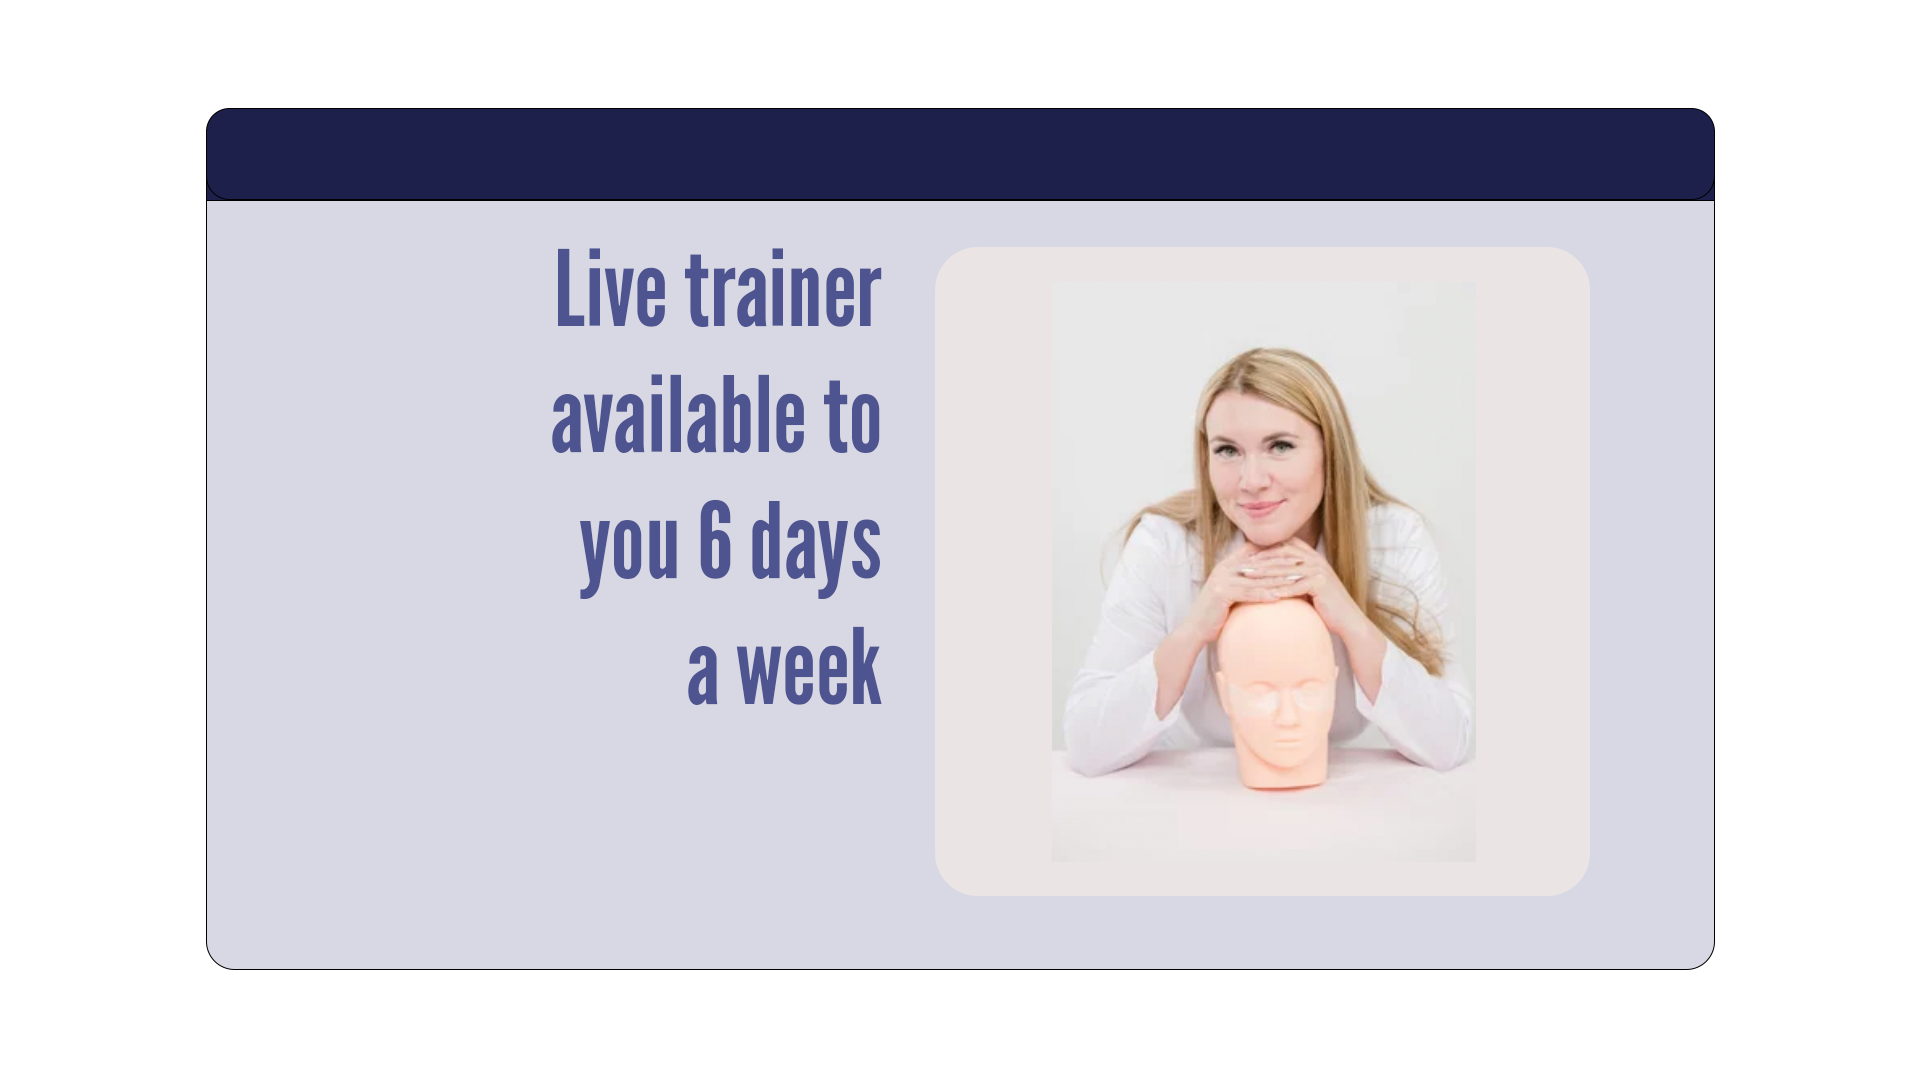 Live trainer available to you 6 days a week